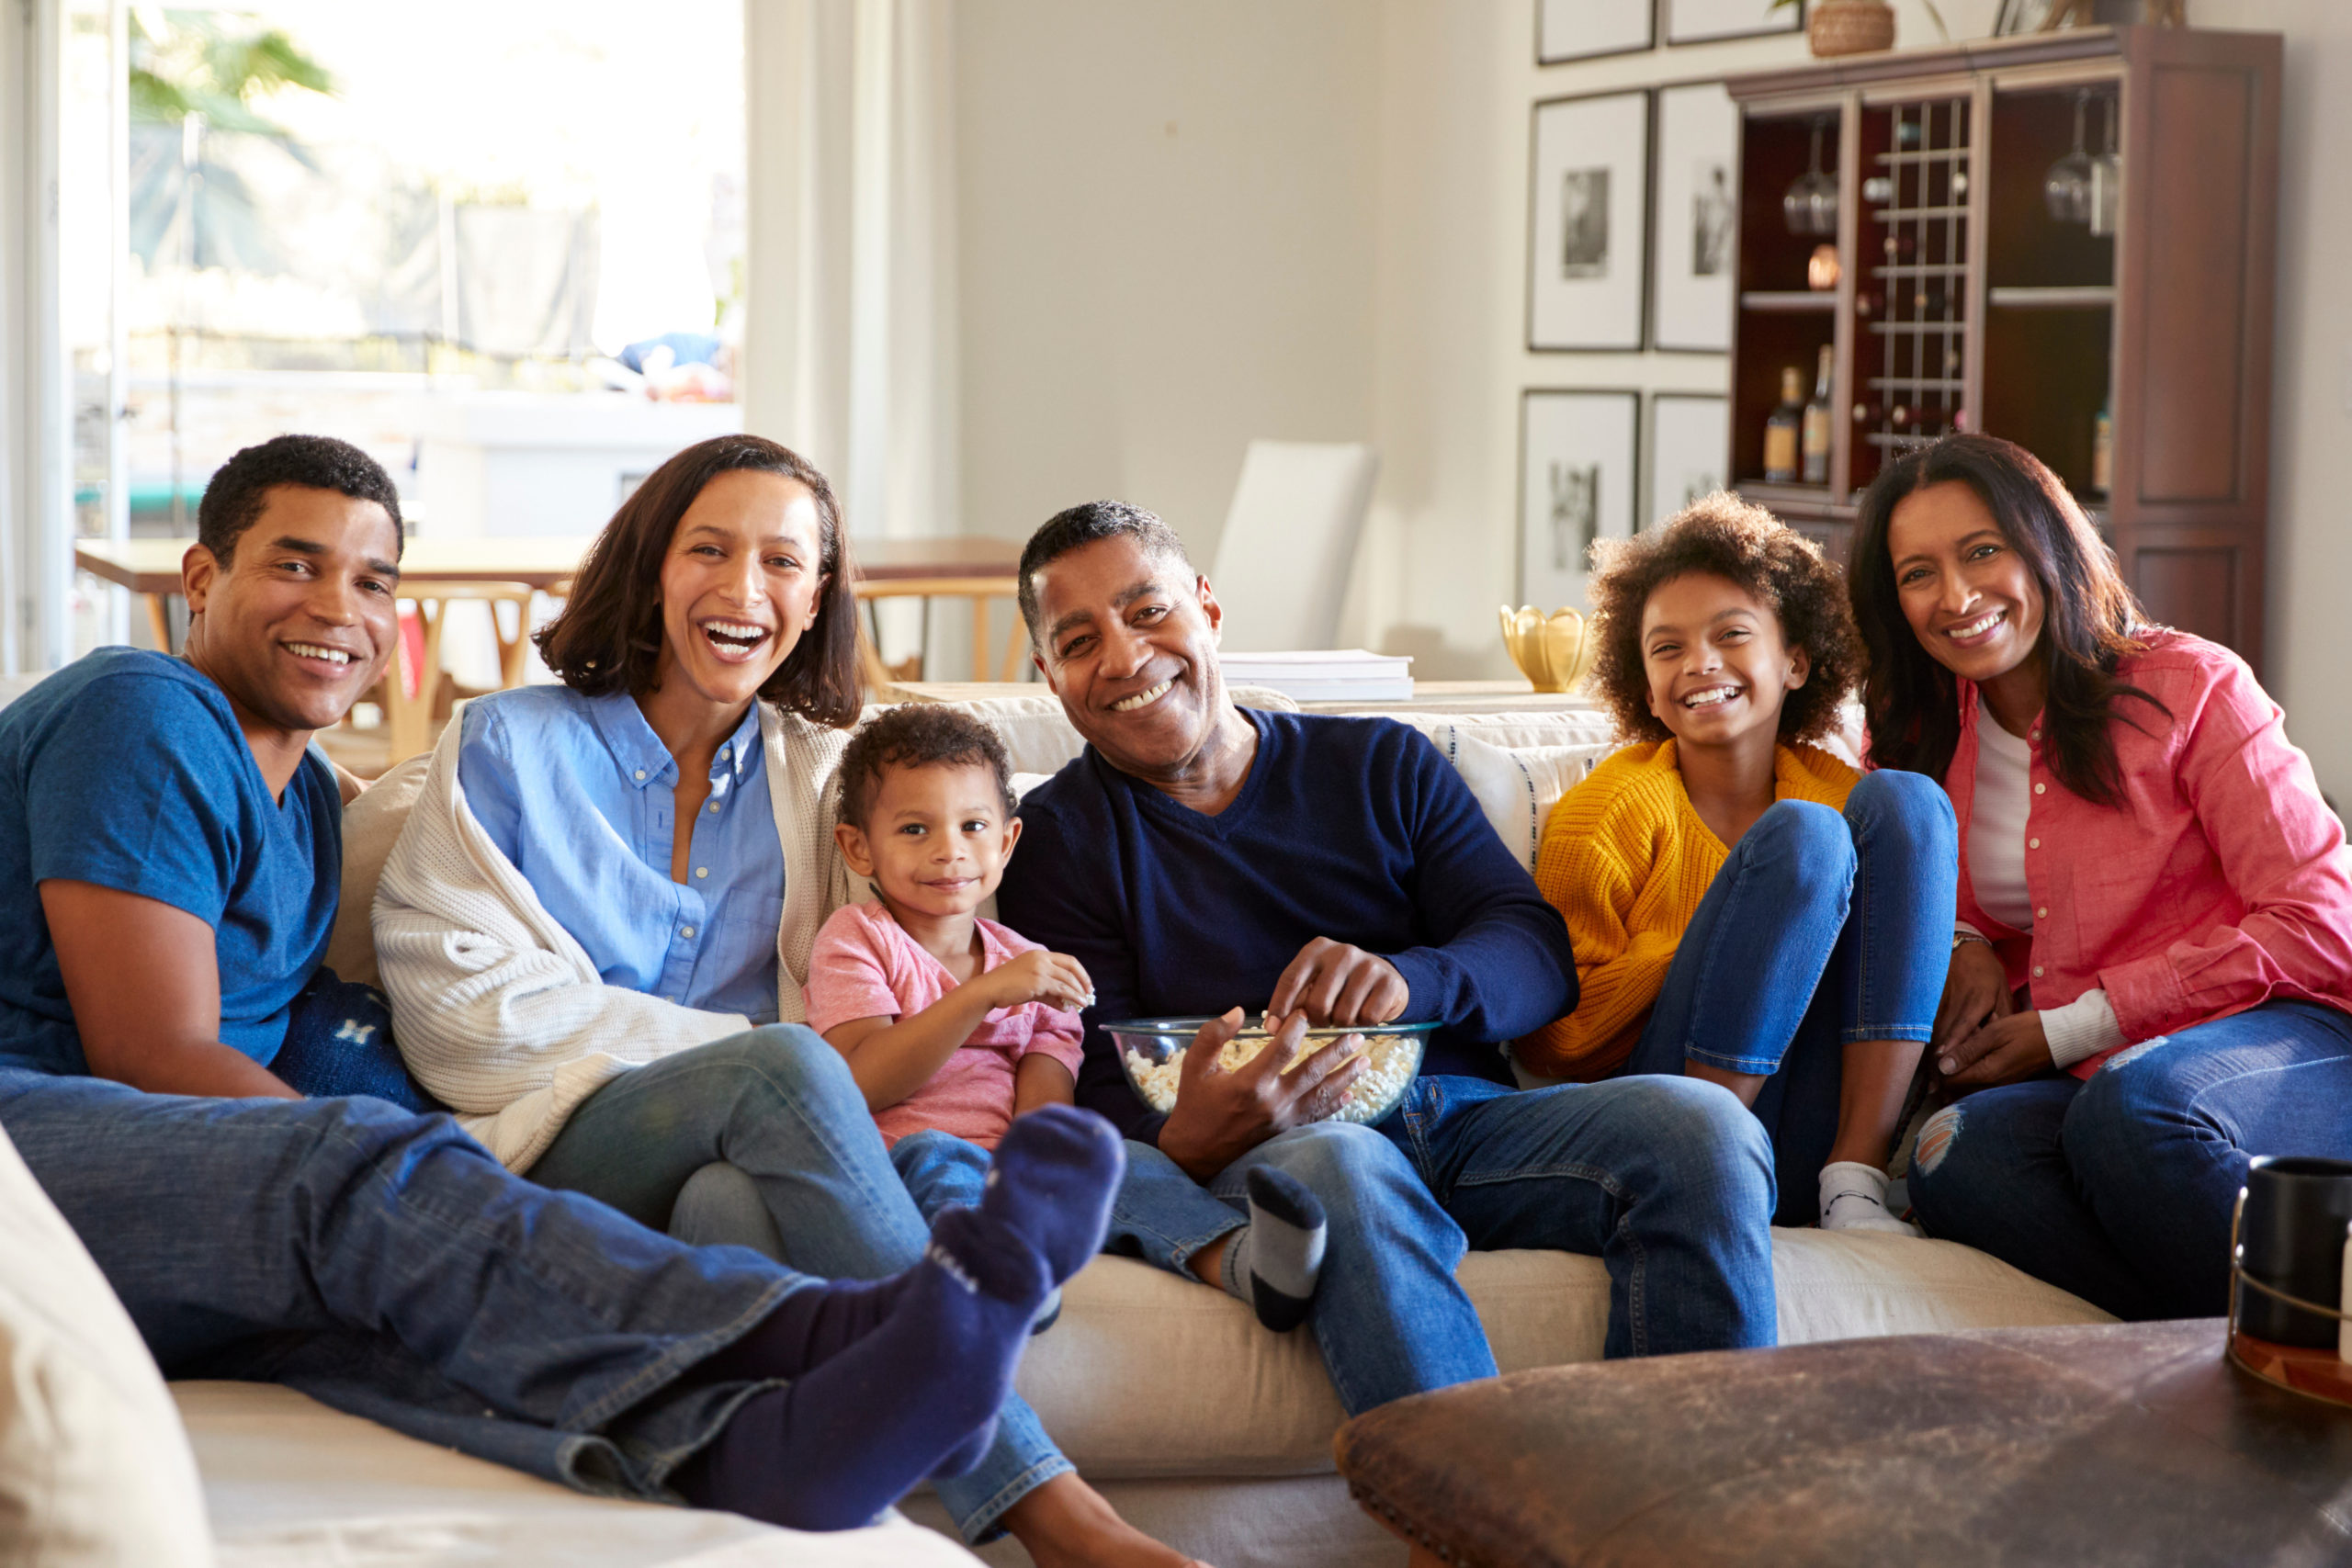 3 generations of supported by WA Cares sit on a couch in their living room. They smile and look at the camera. In the center is a mixed race male-presenting person aged approximately 50. He is smiling and holding a bowl of popcorn. To his right is a child aged around 4, wearing a pink shirt. They are surrounded by four mixed-race family members, 3 female-presenting and one male-presenting.